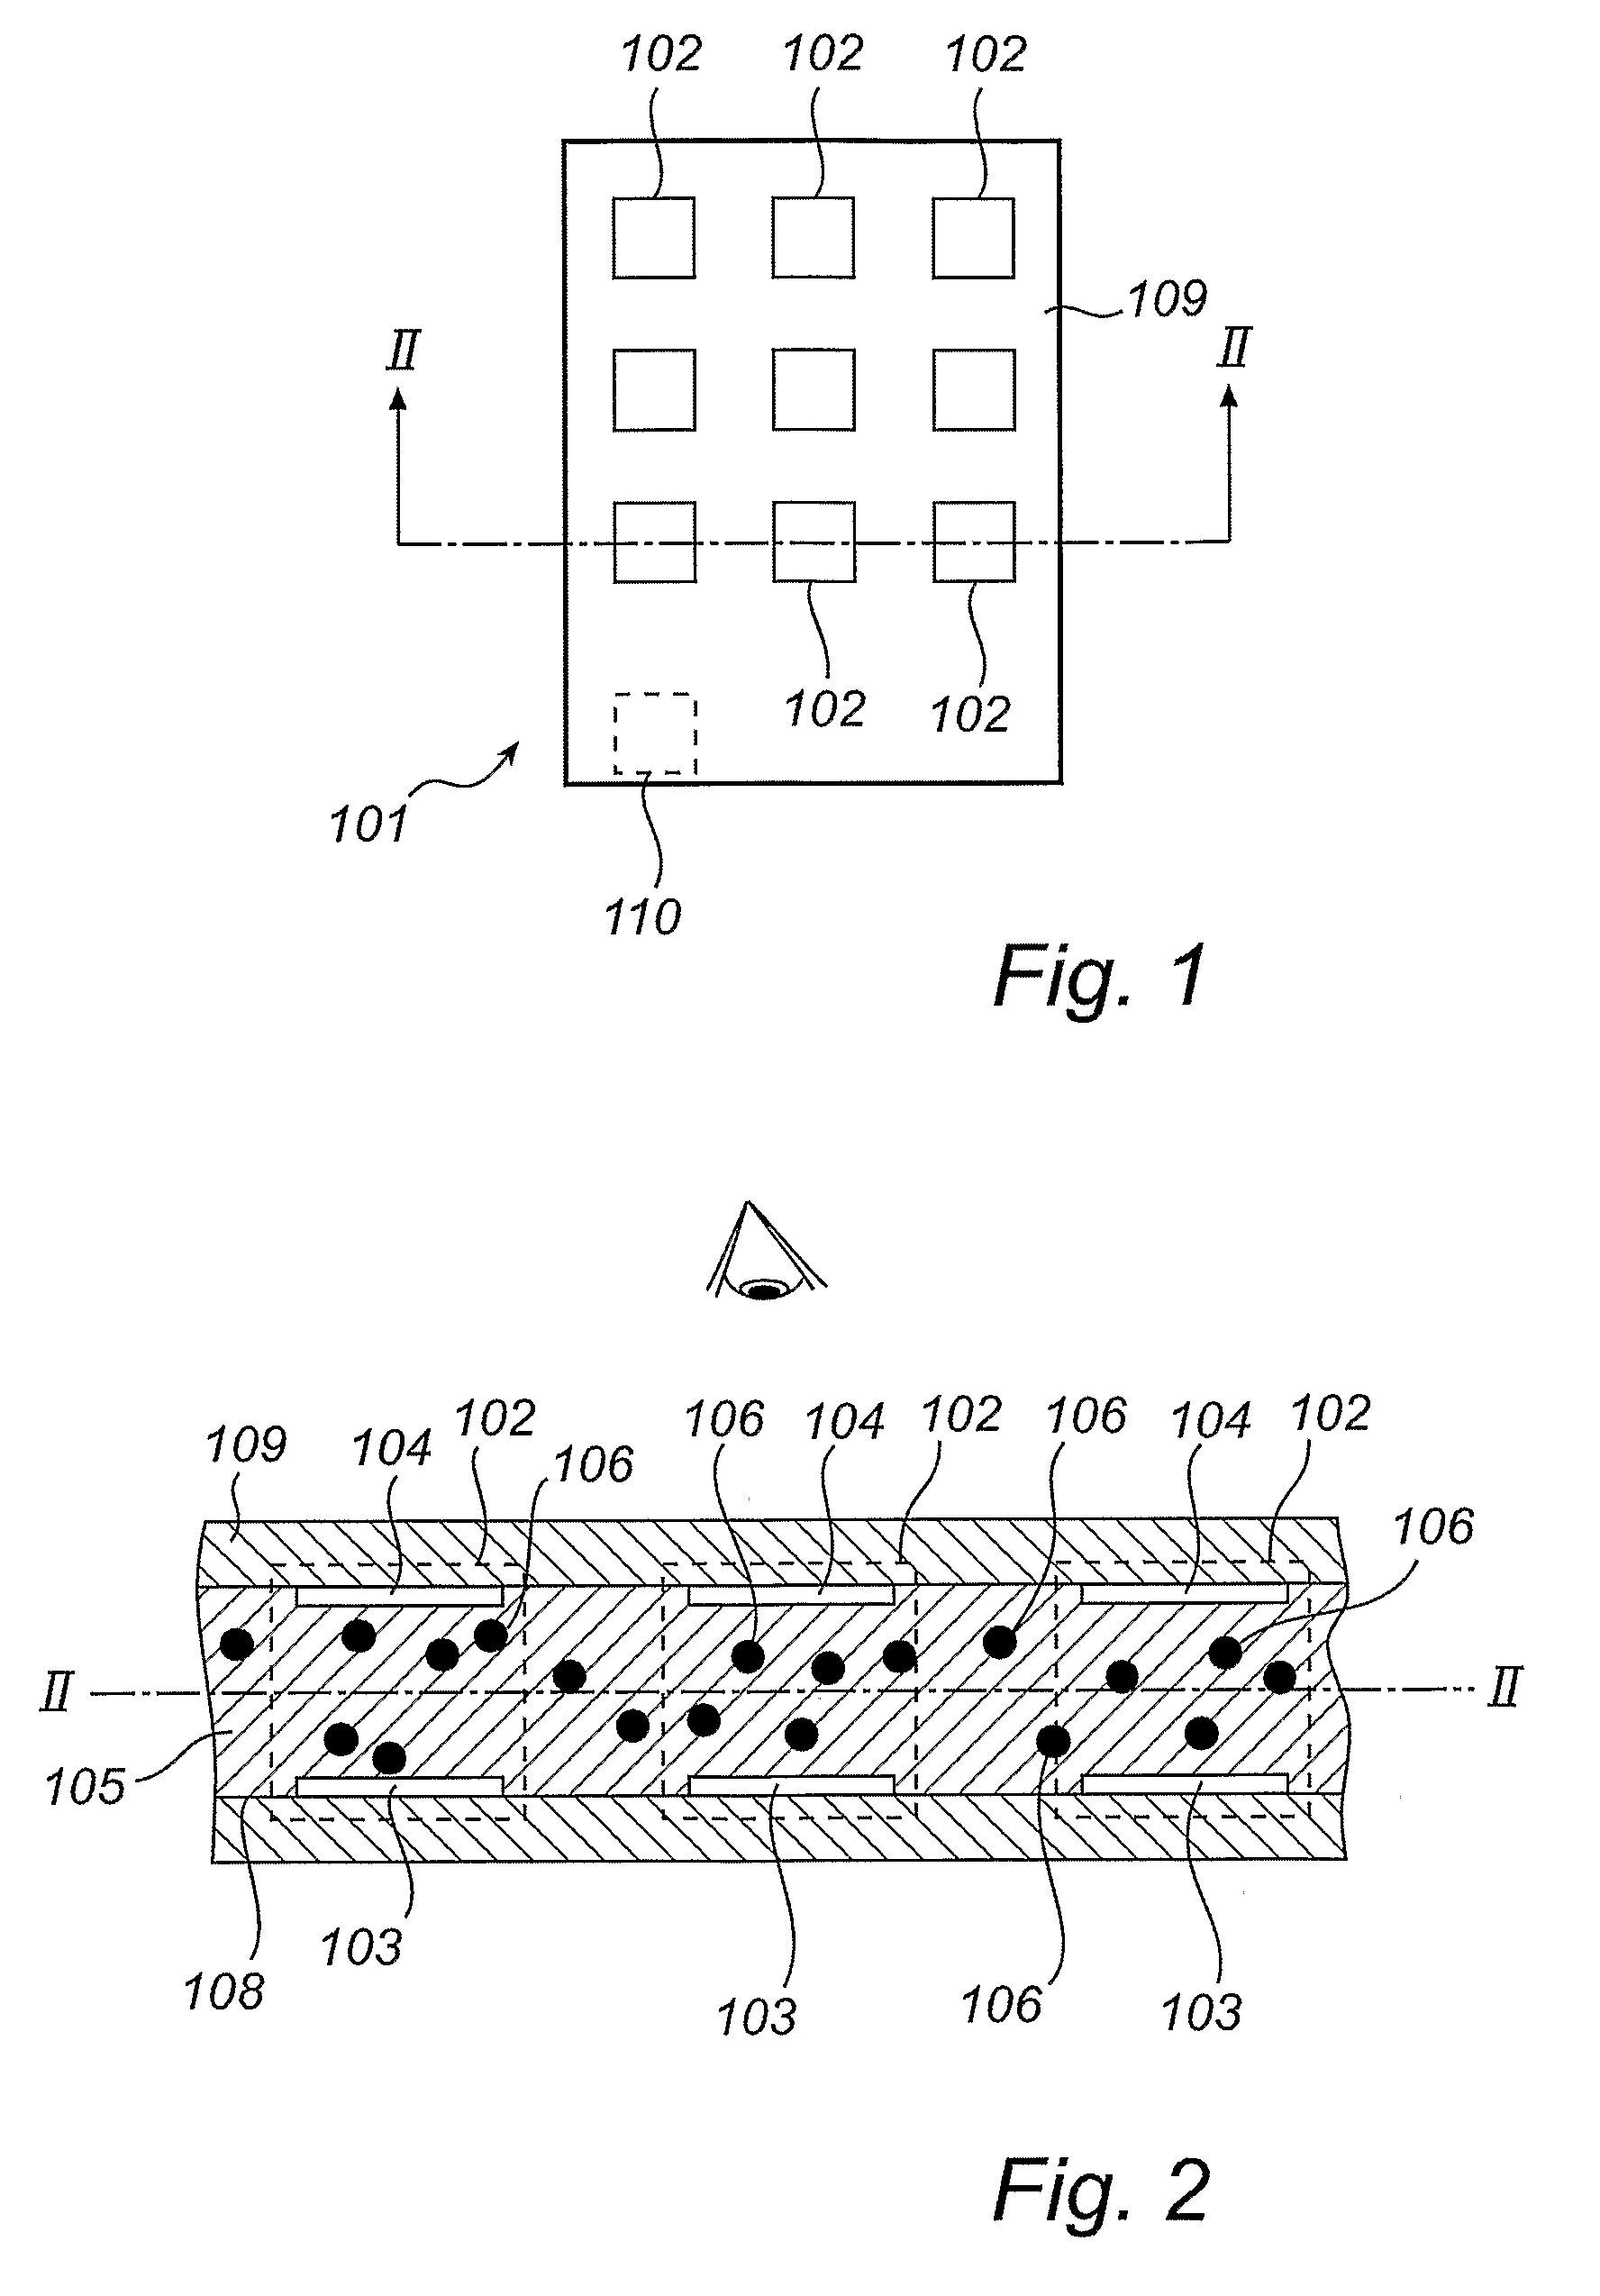 Transition between grayscale and monochrome addressing of an electrophoretic display